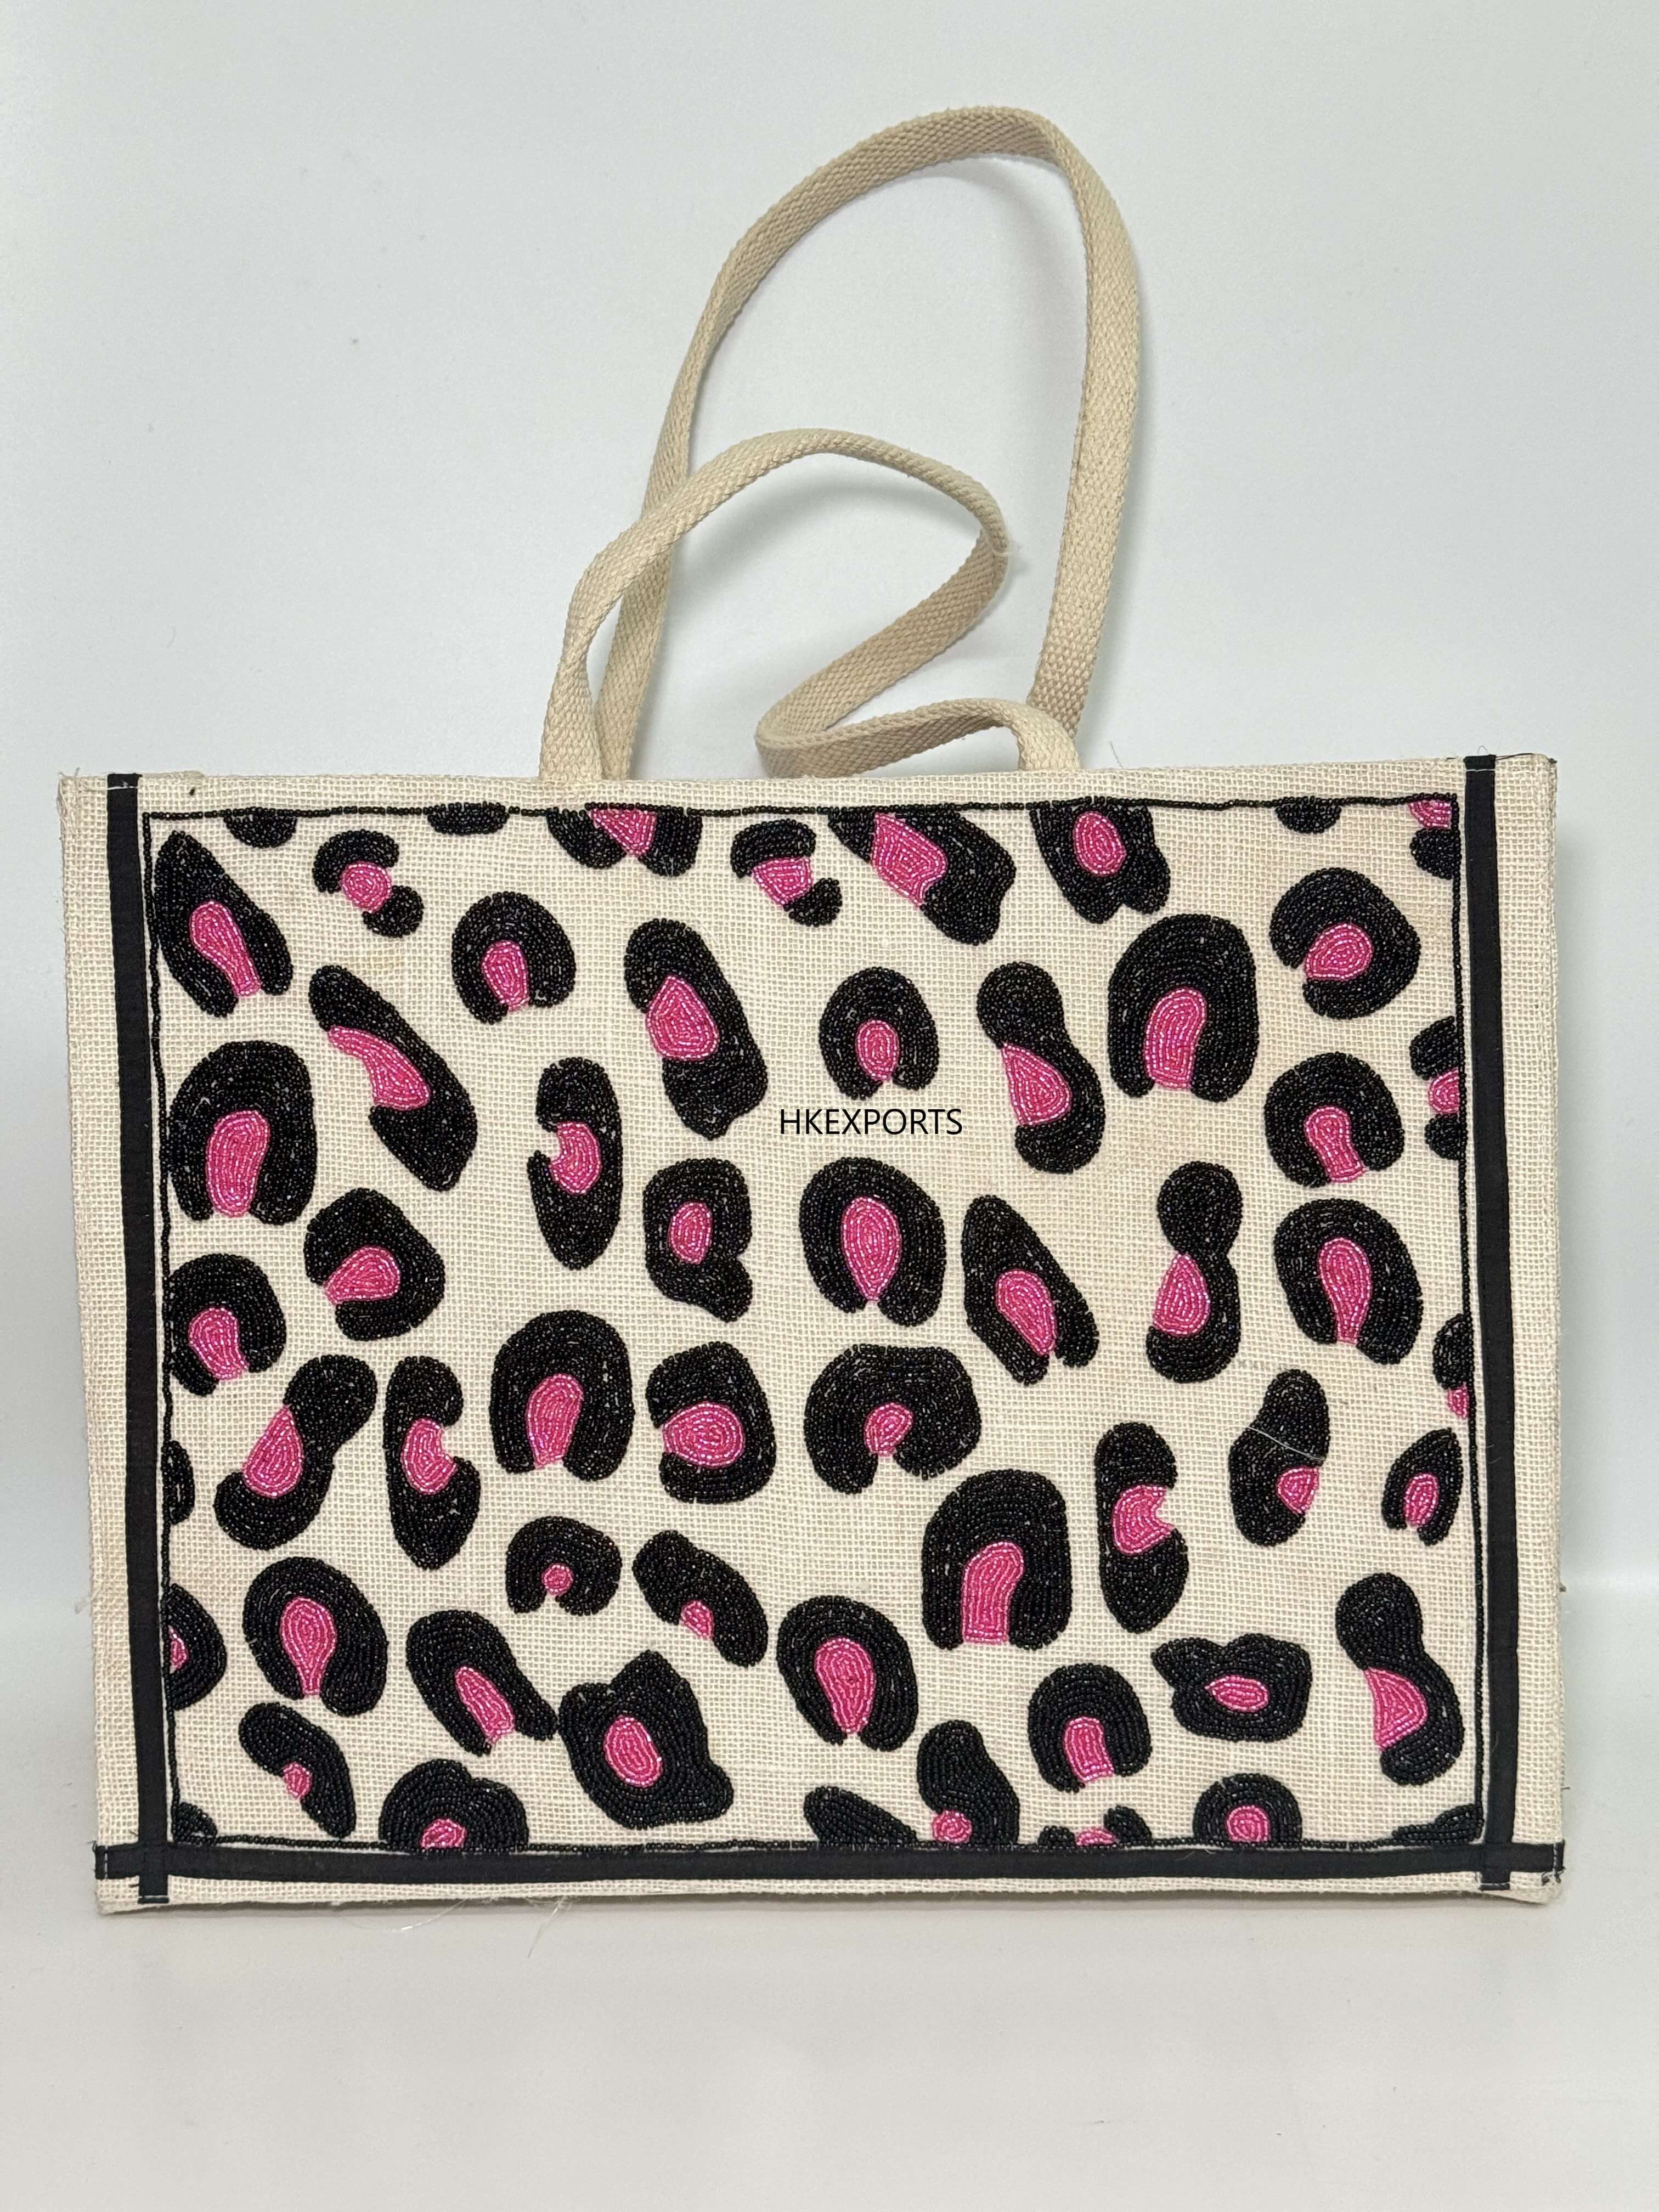 purrfectly-glam-pink-and-black-leopard-print-tote-bag-a-stylish-blend-of-wild-charm-and-modern-elegance